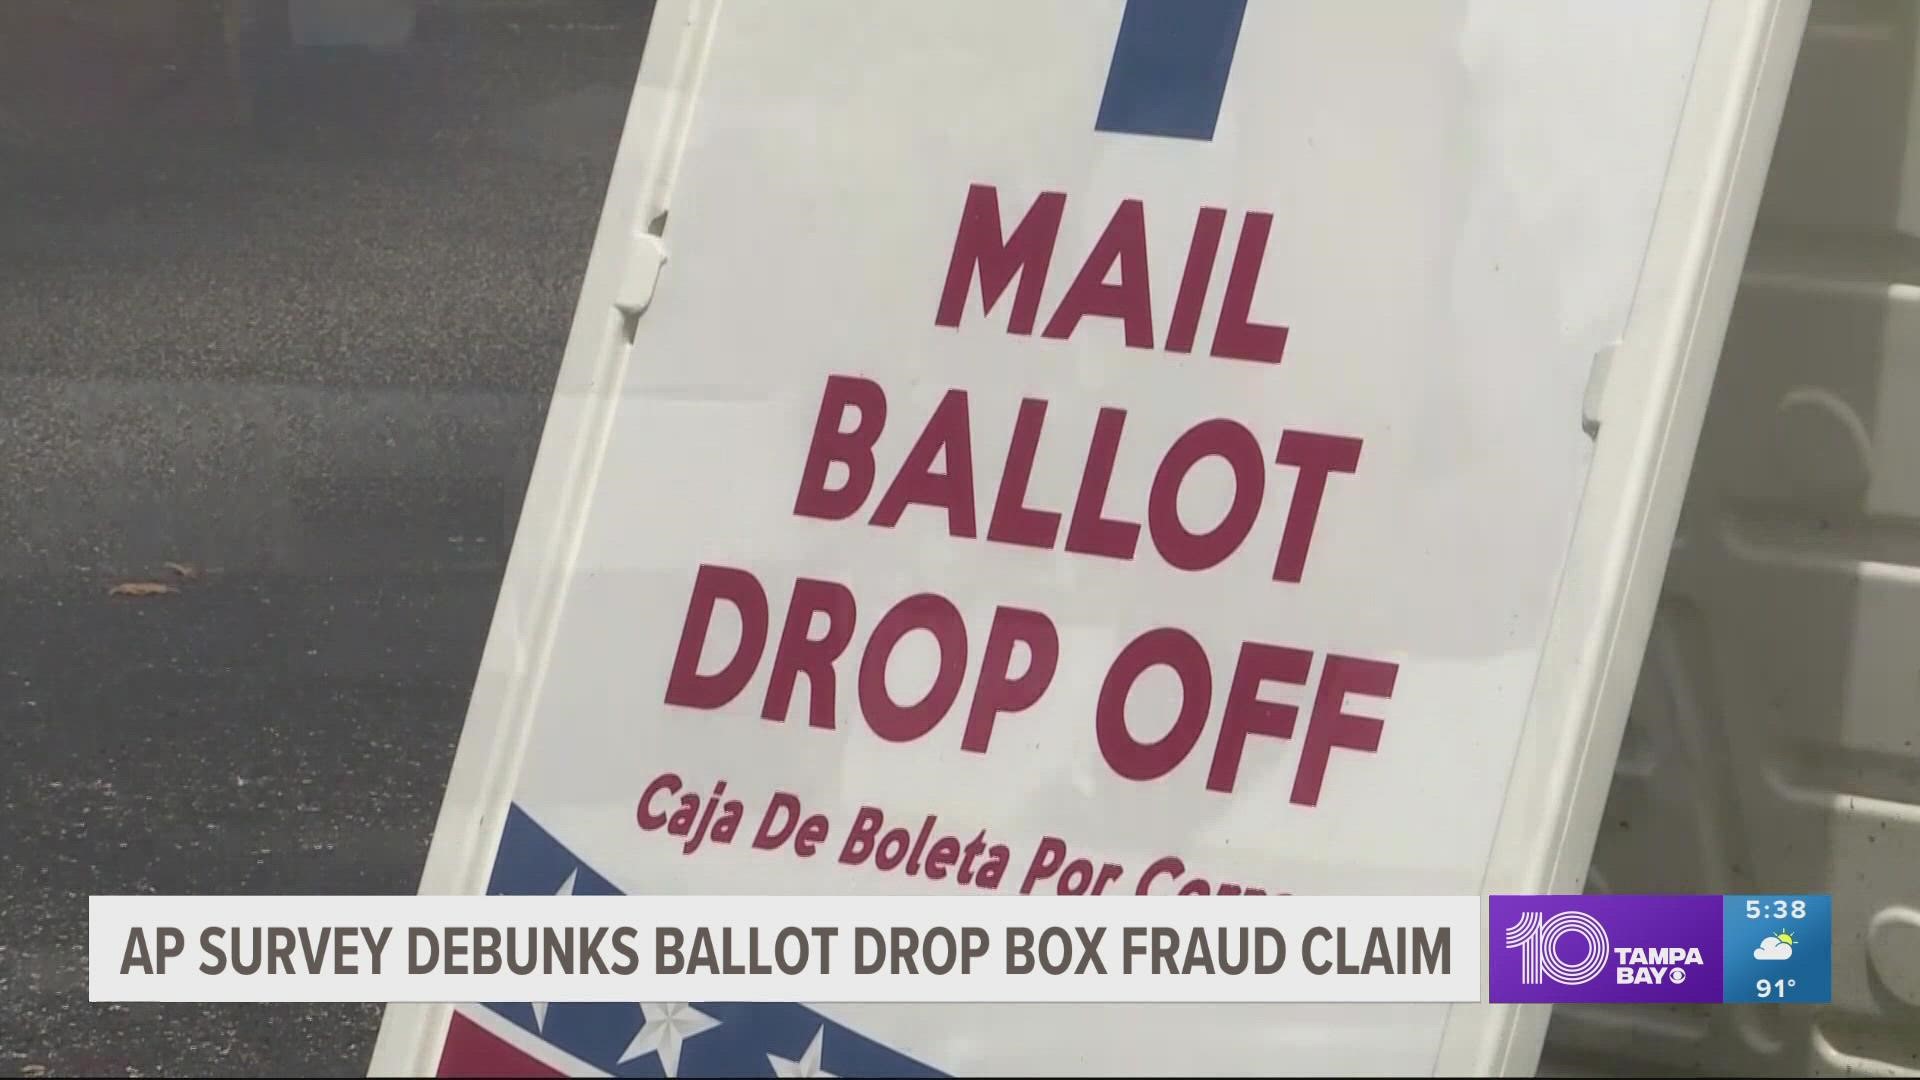 The survey found no cases of widespread fraud, ballot box damage or vandalism that could have affected the results of the 2020 election.